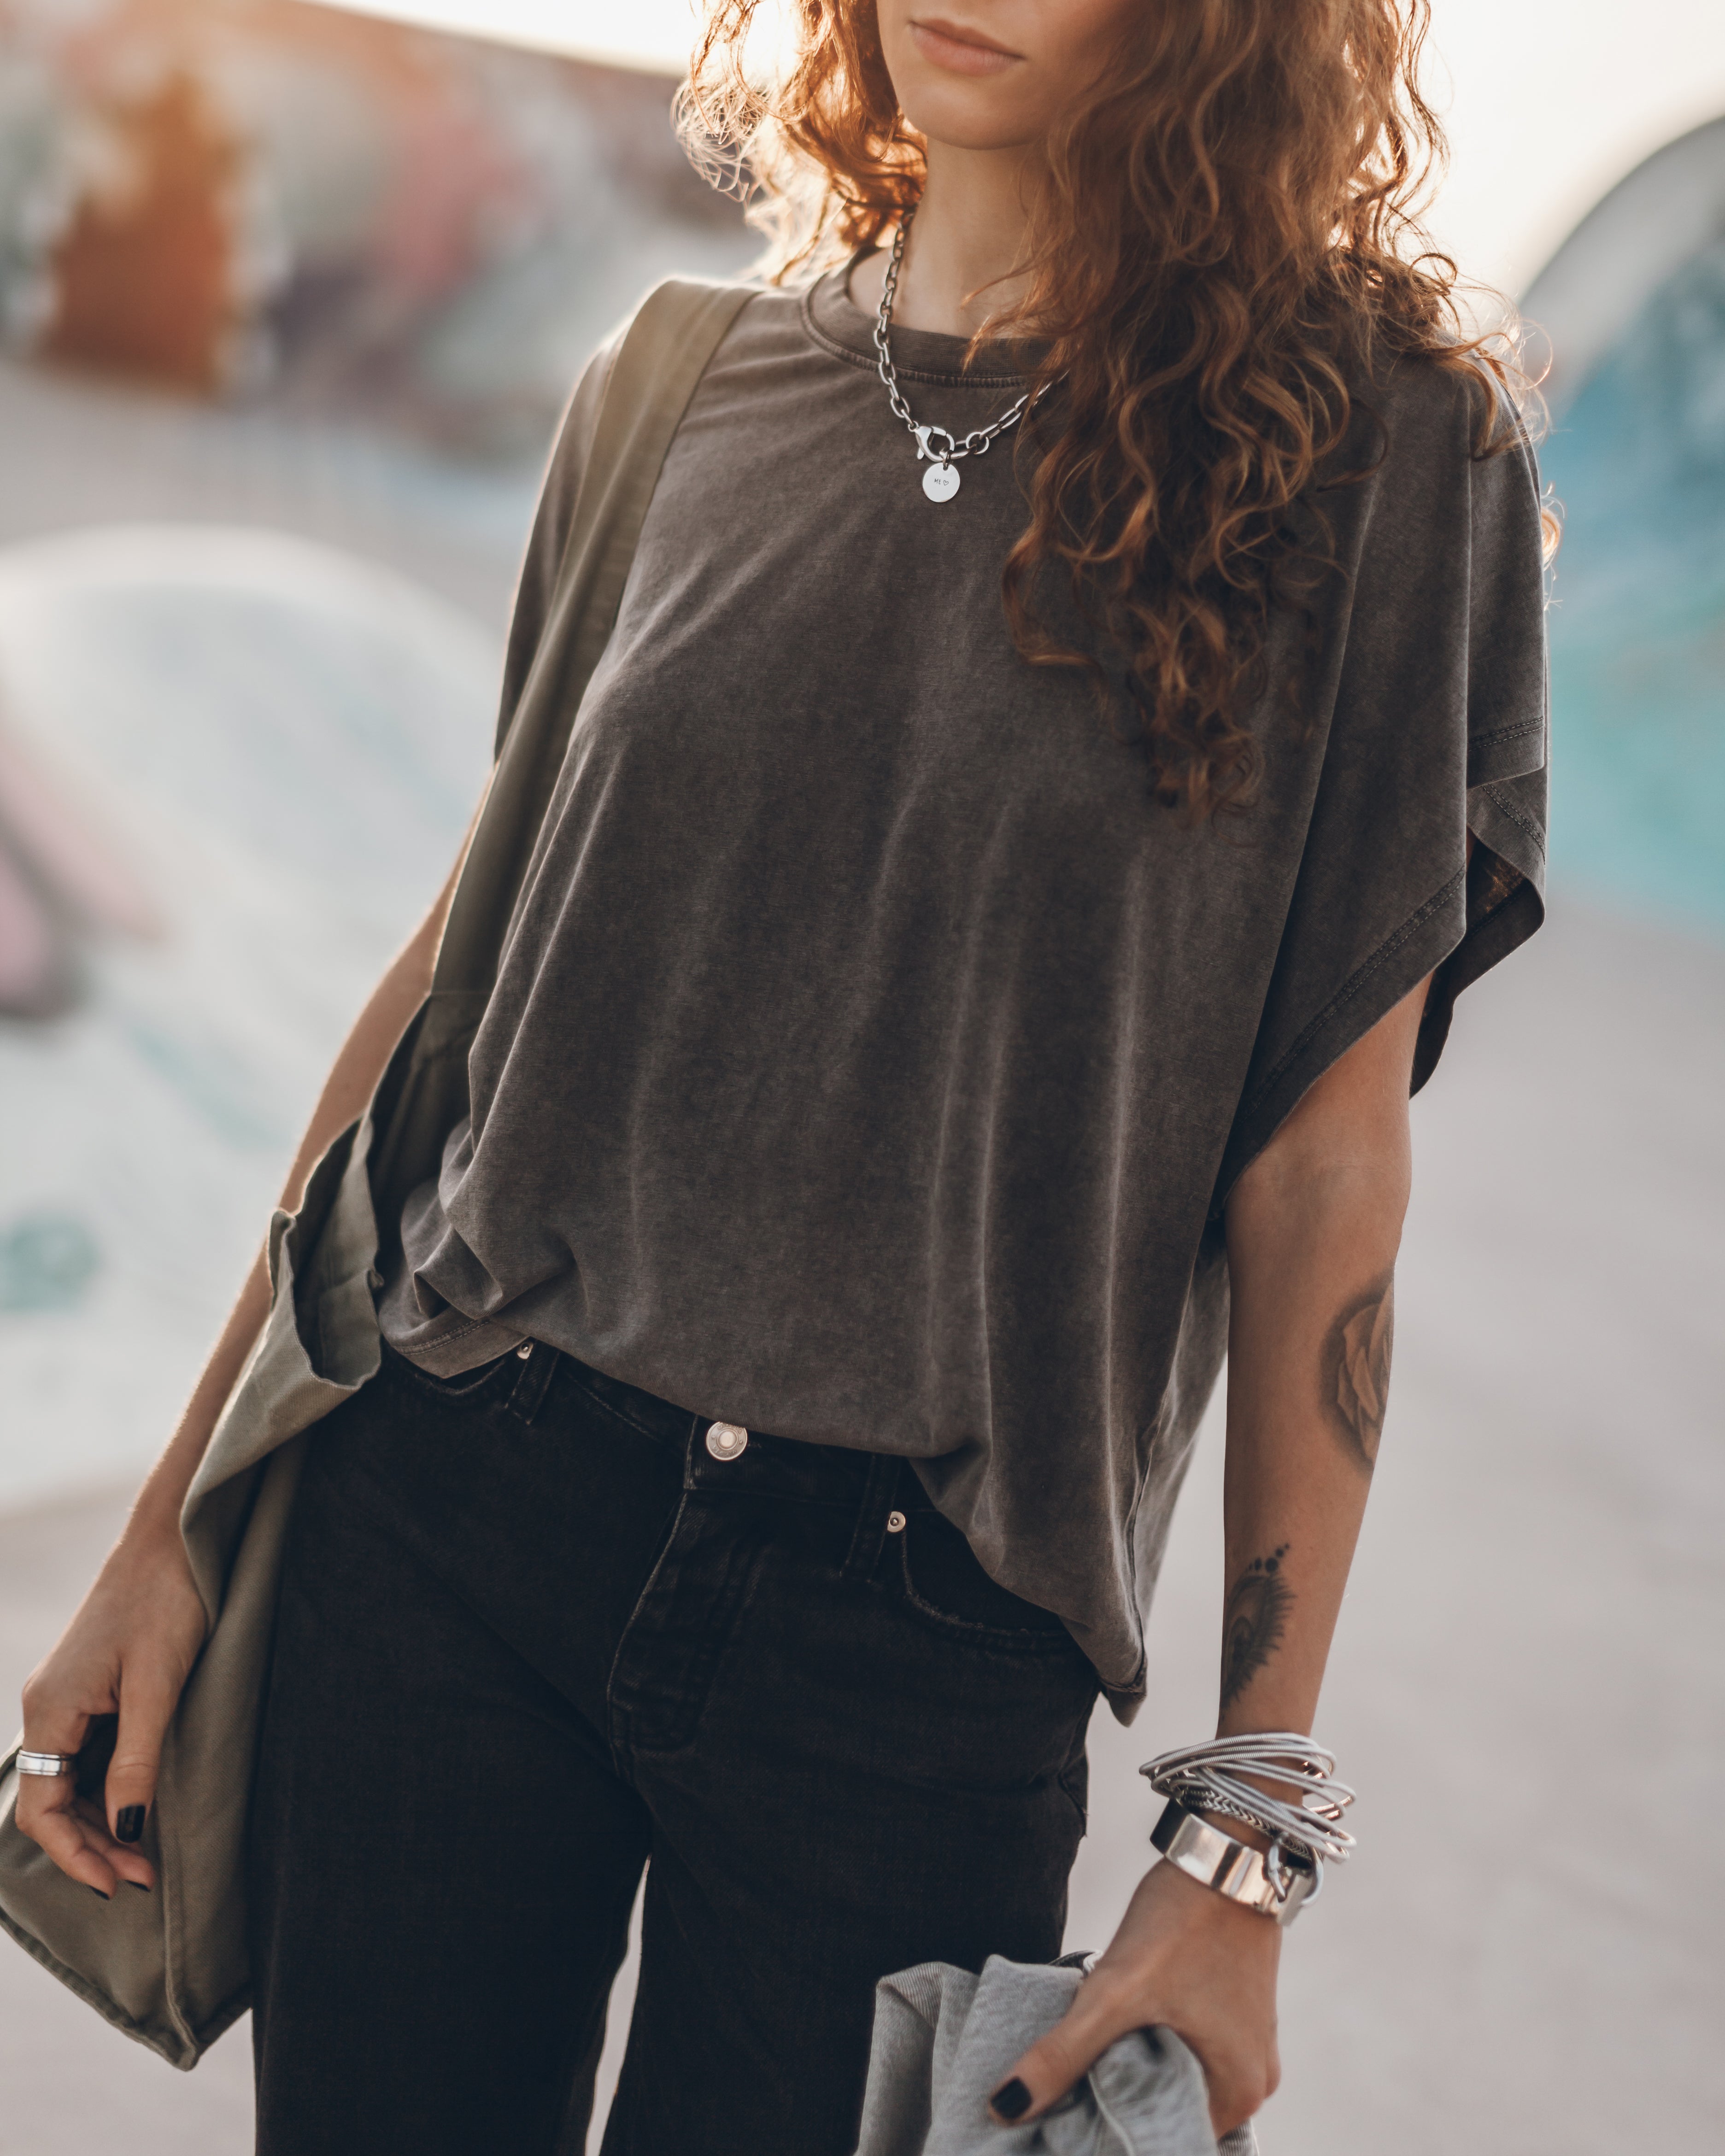 The Dark Faded Batwing T-Shirt